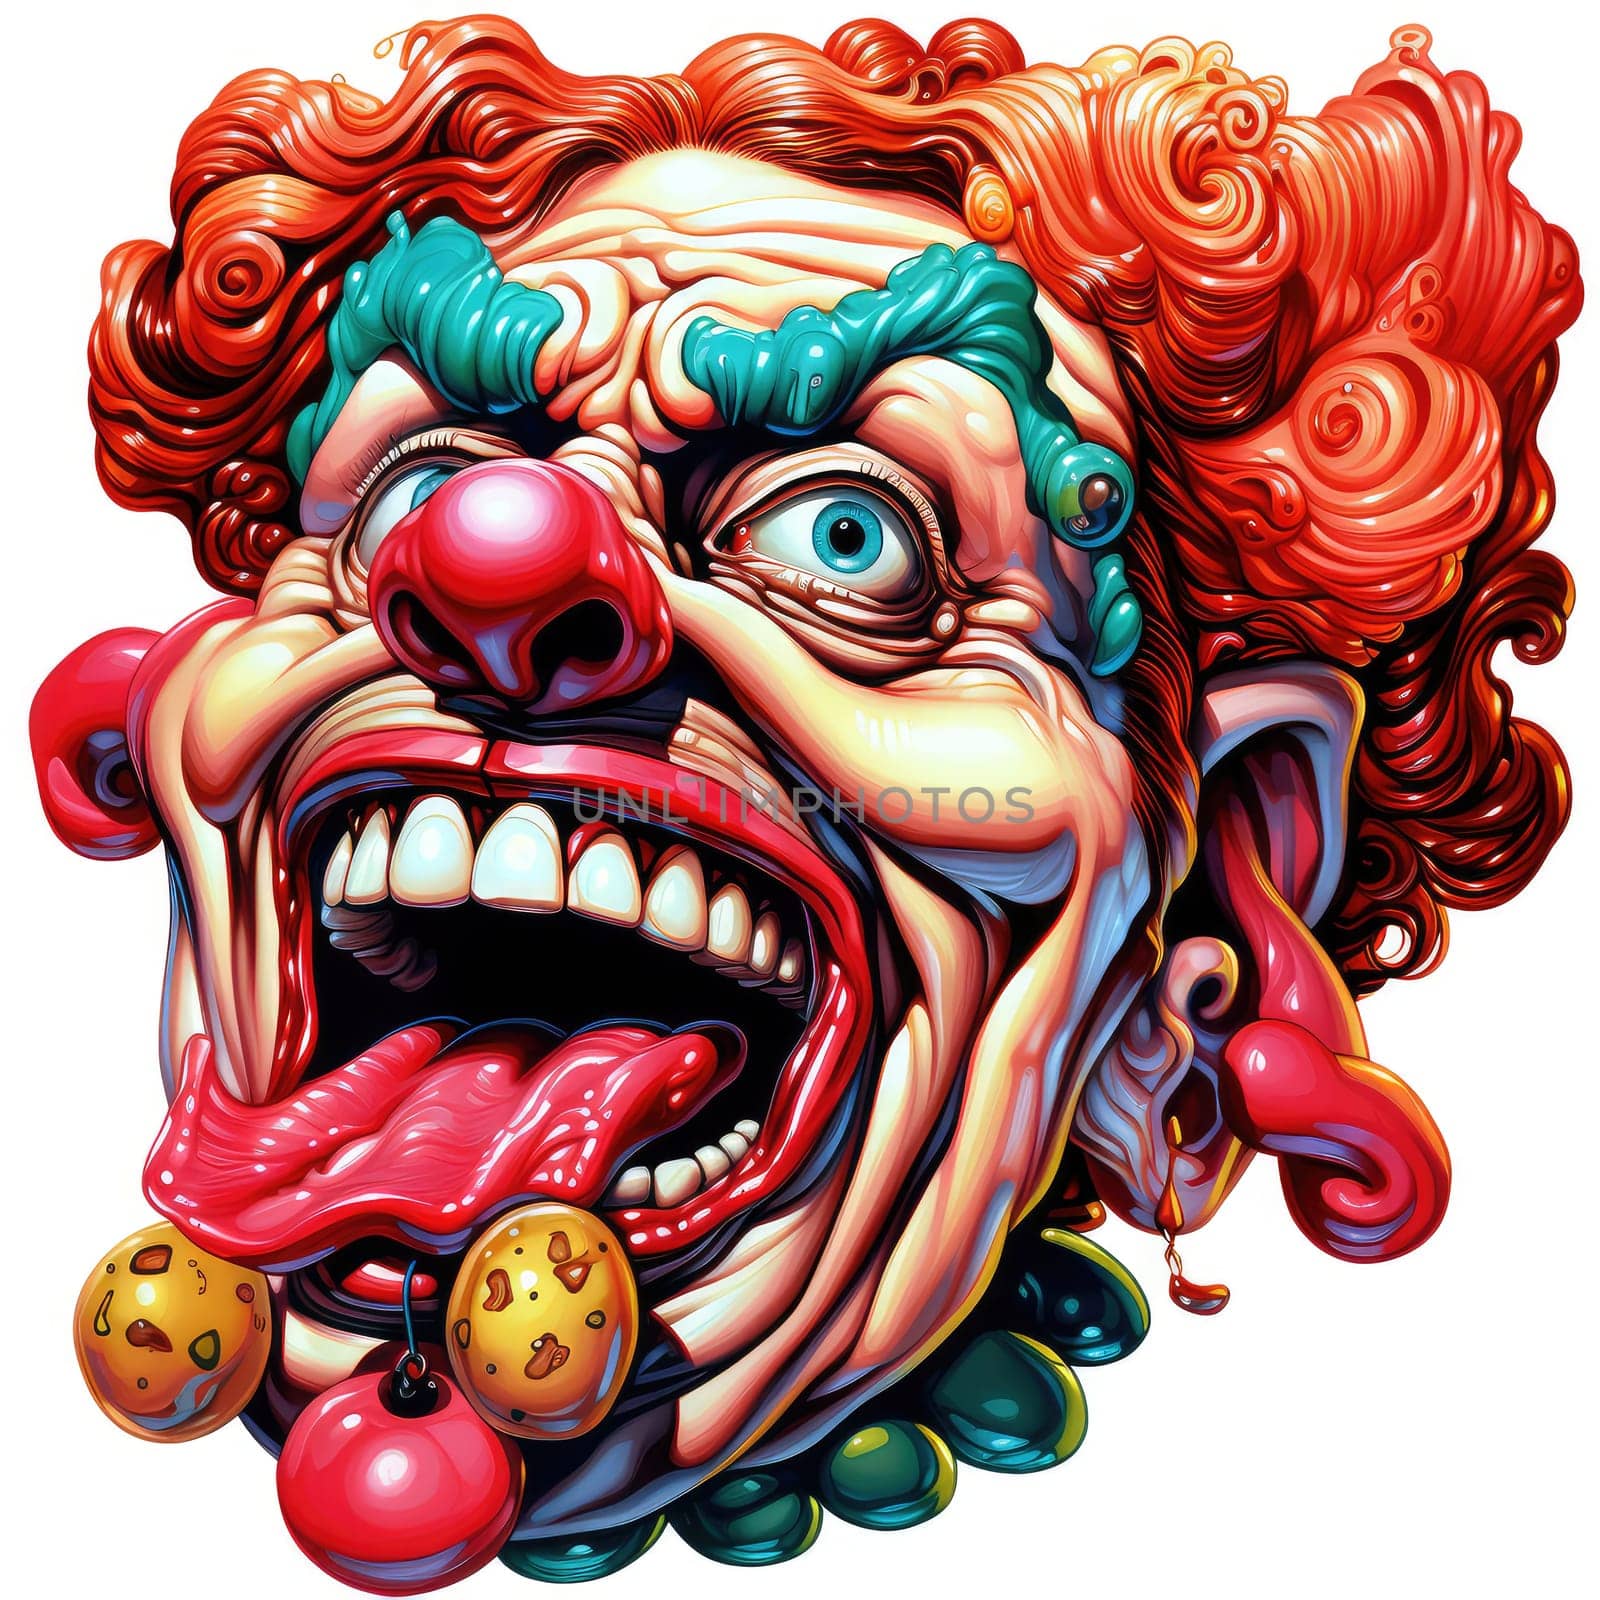 Portrait of an emotional clown in a puppet-cartoon psychedelic pop art style. Template for sticker, poster, t-shirt print, etc.